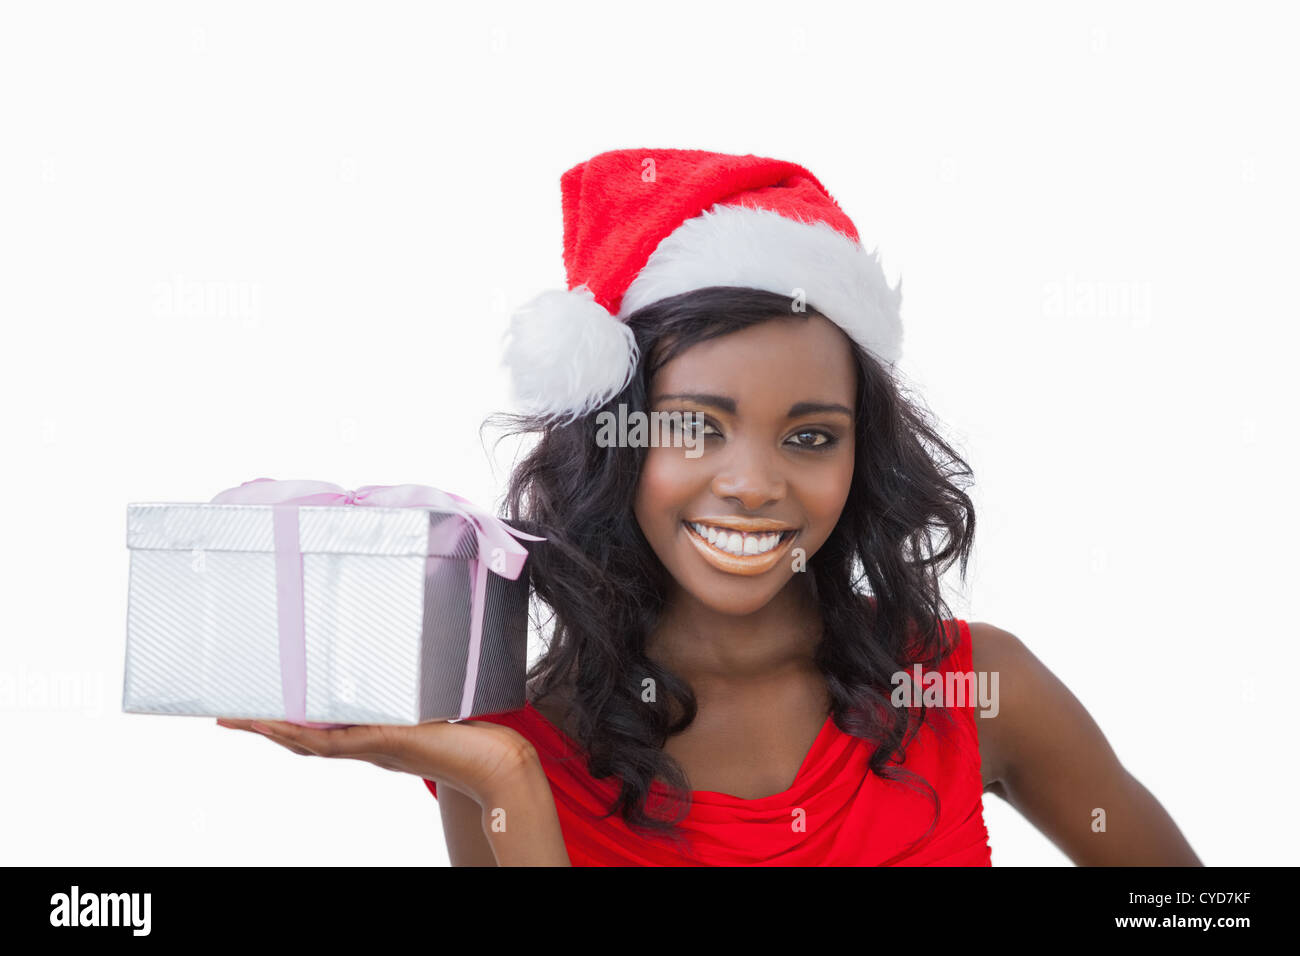 Woman standing holding a Christmas present Stock Photo